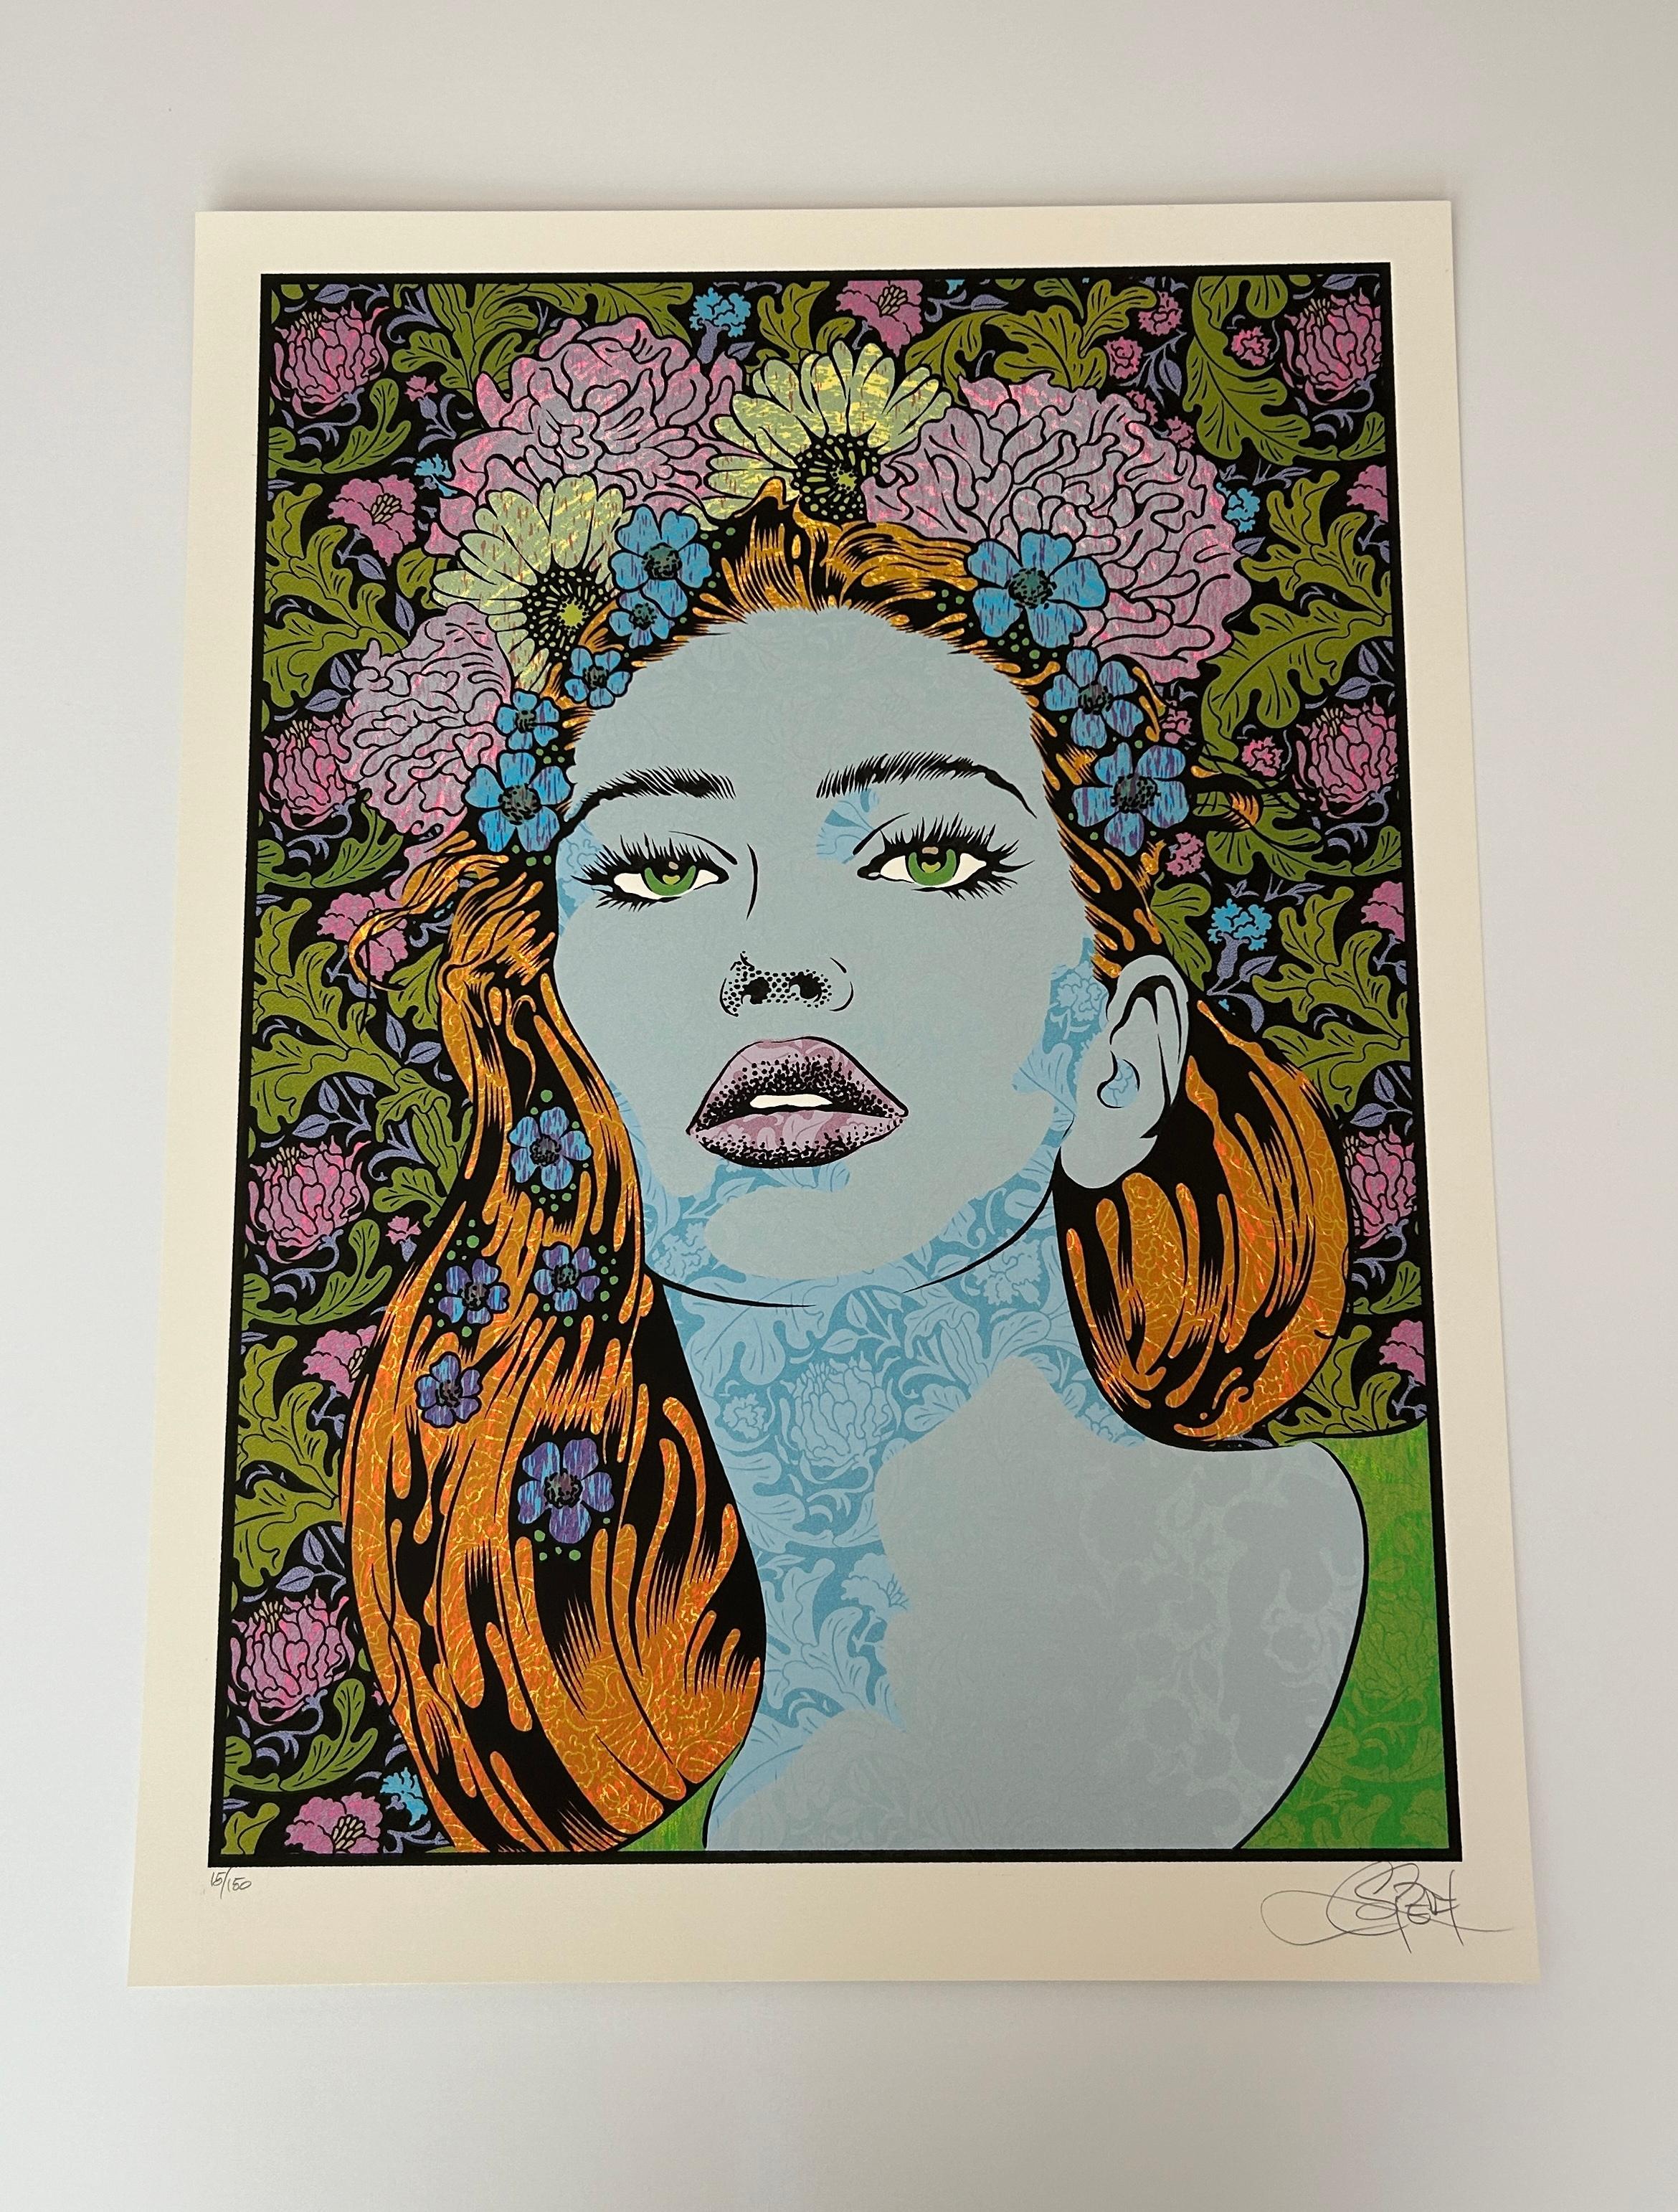 Chuck Sperry Beauty

Screenprint on cream cover paper

25.5 x 19 inches

Limited Edition out of 150

Signed by Chuck Sperry 

#15/150